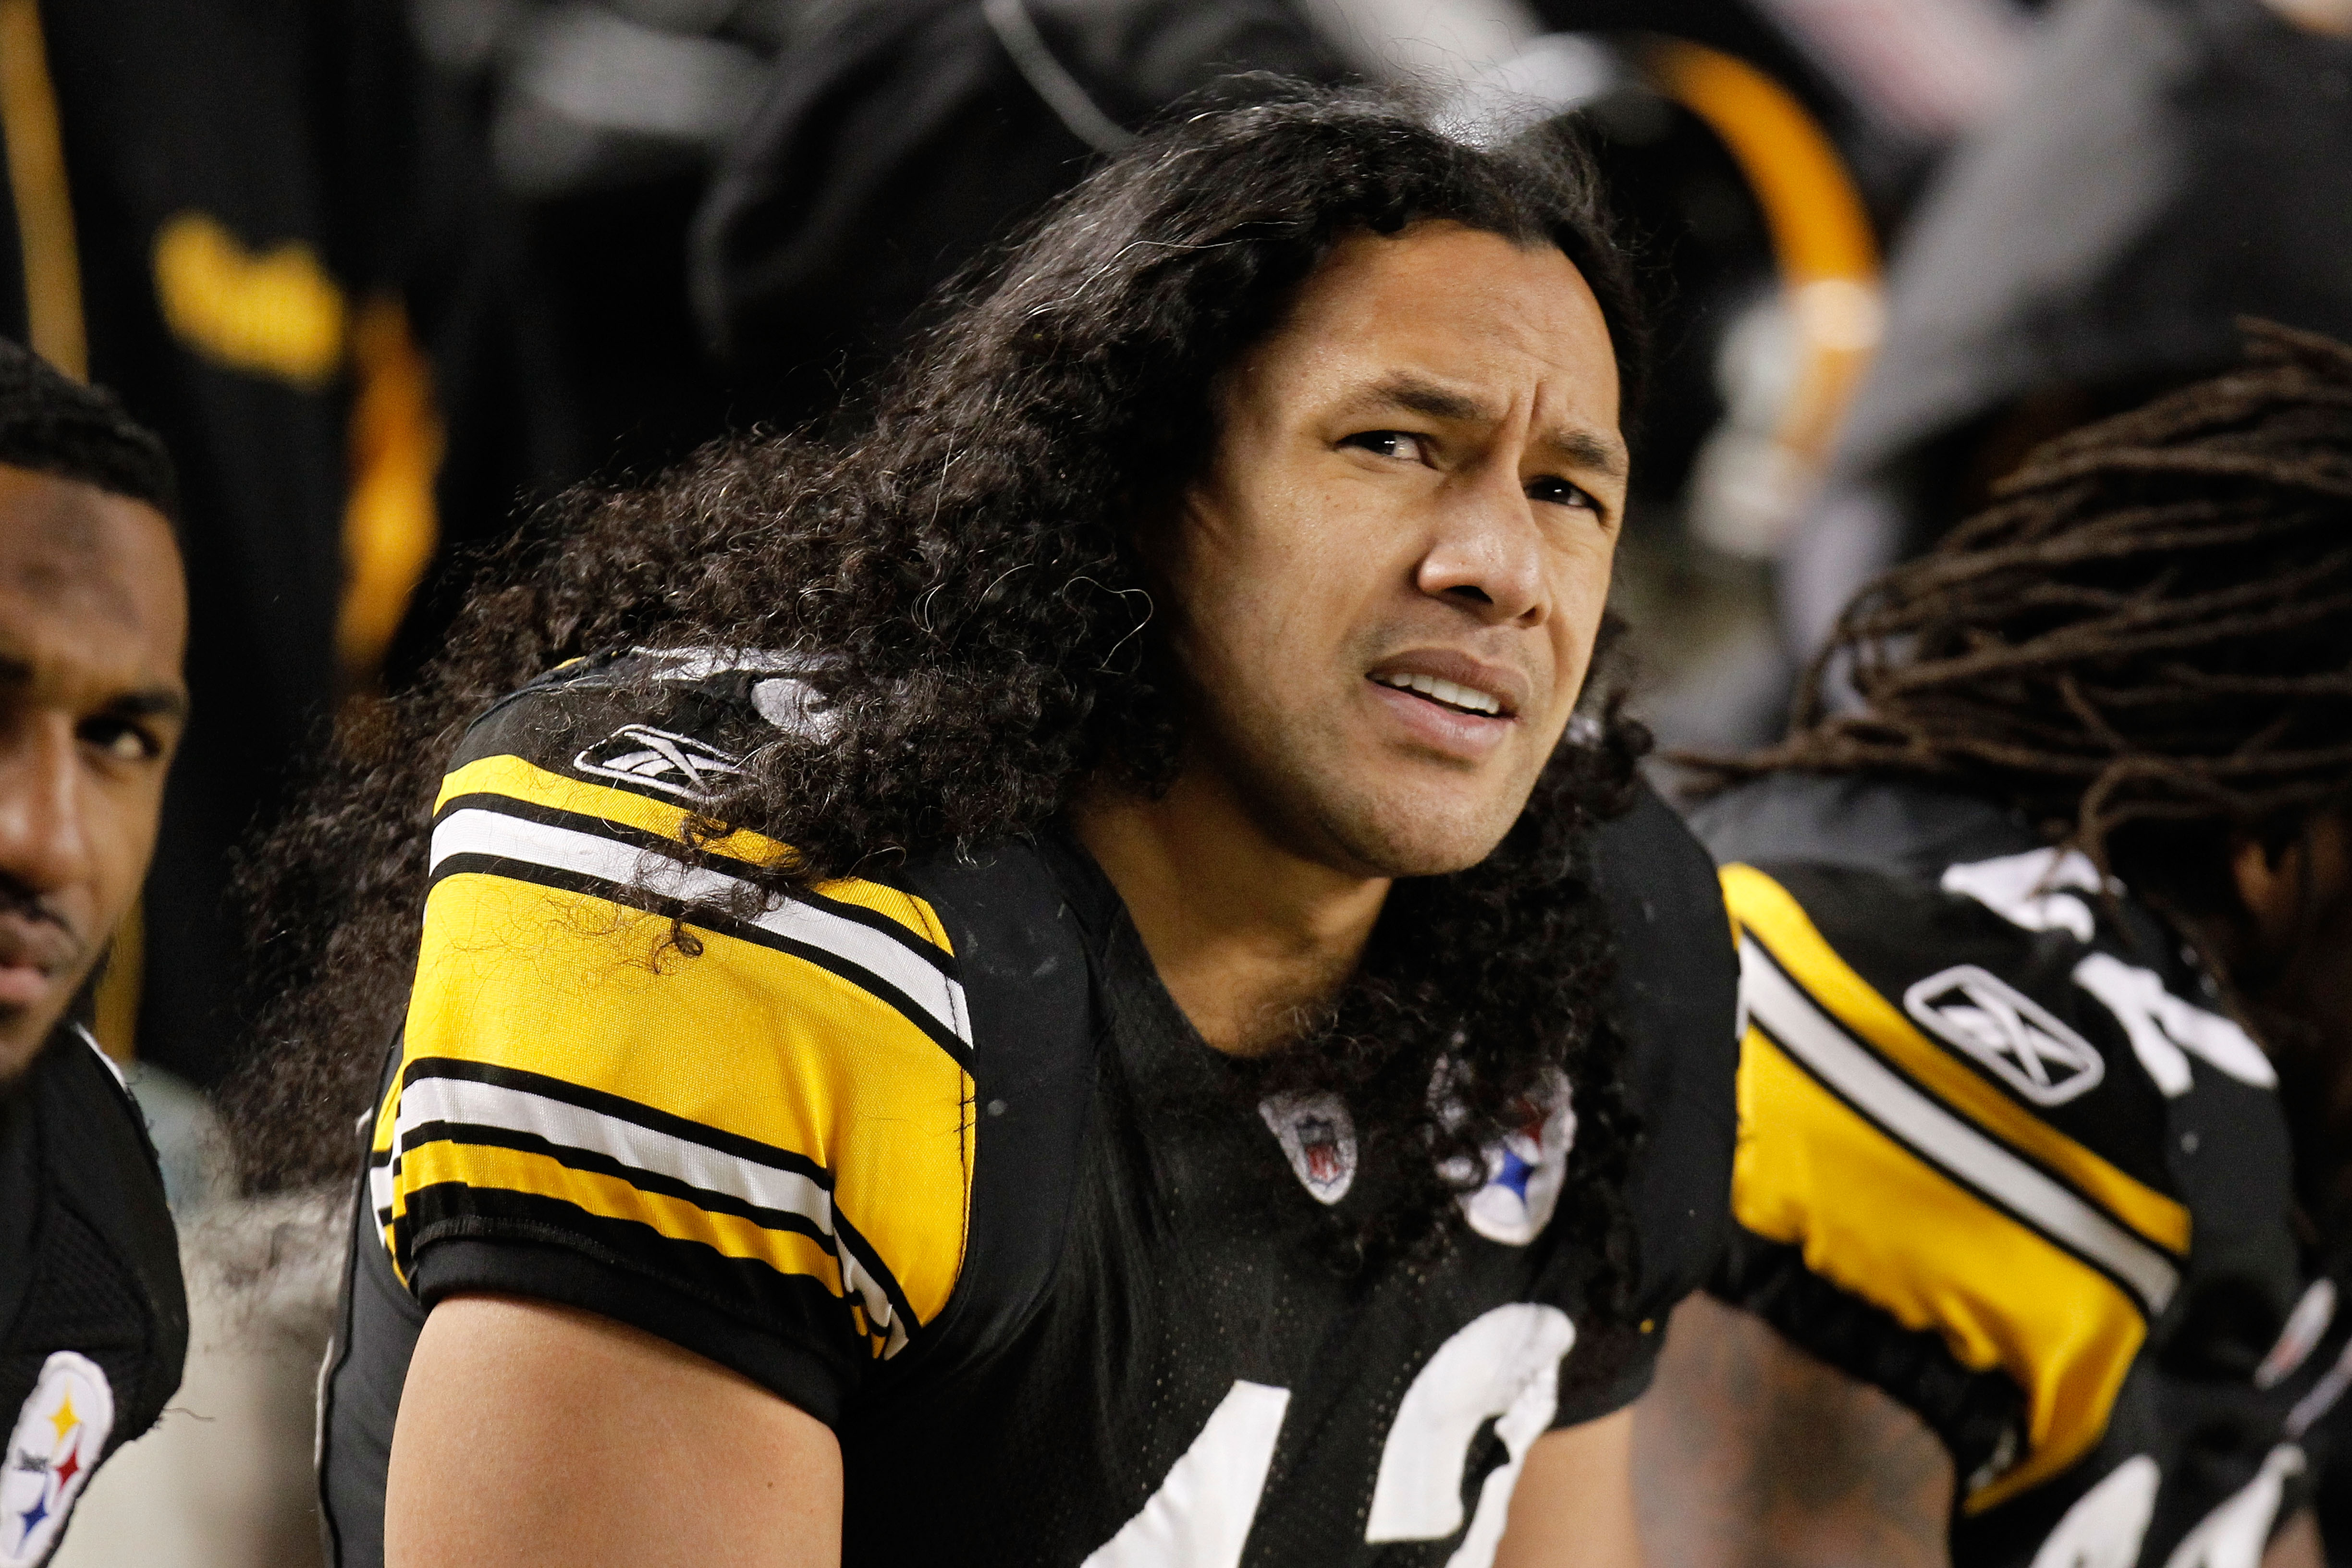 PITTSBURGH, PA - JANUARY 15:  Safety Troy Polamalu #43 of the Pittsburgh Steelers looks on during the AFC Divisional Playoff Game against the Baltimore Ravens at Heinz Field on January 15, 2011 in Pittsburgh, Pennsylvania.  (Photo by Gregory Shamus/Getty